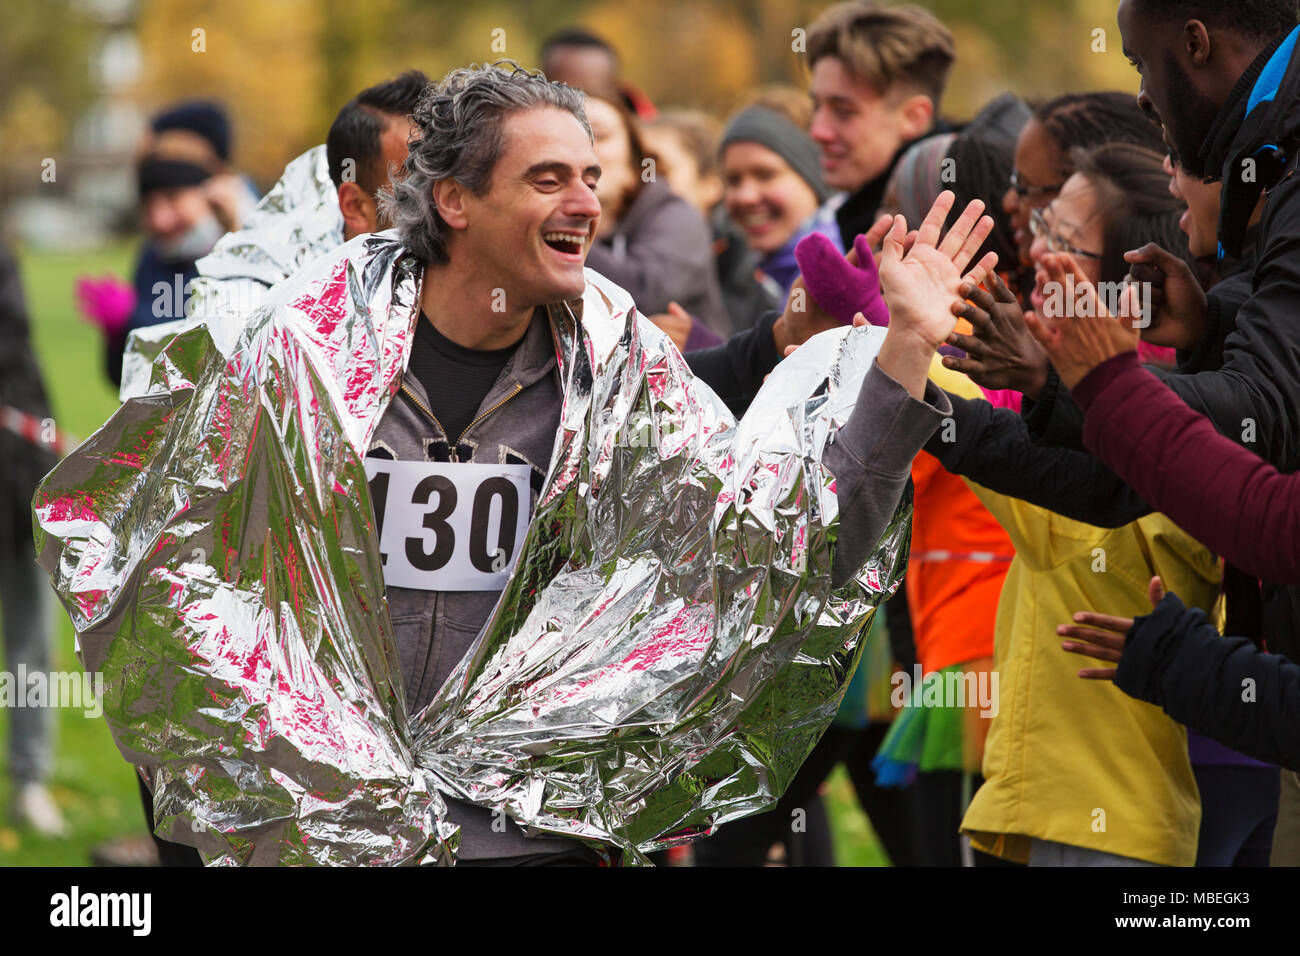 Enthusiastic male marathon runner in thermal blanket high-fiving spectators Stock Photo